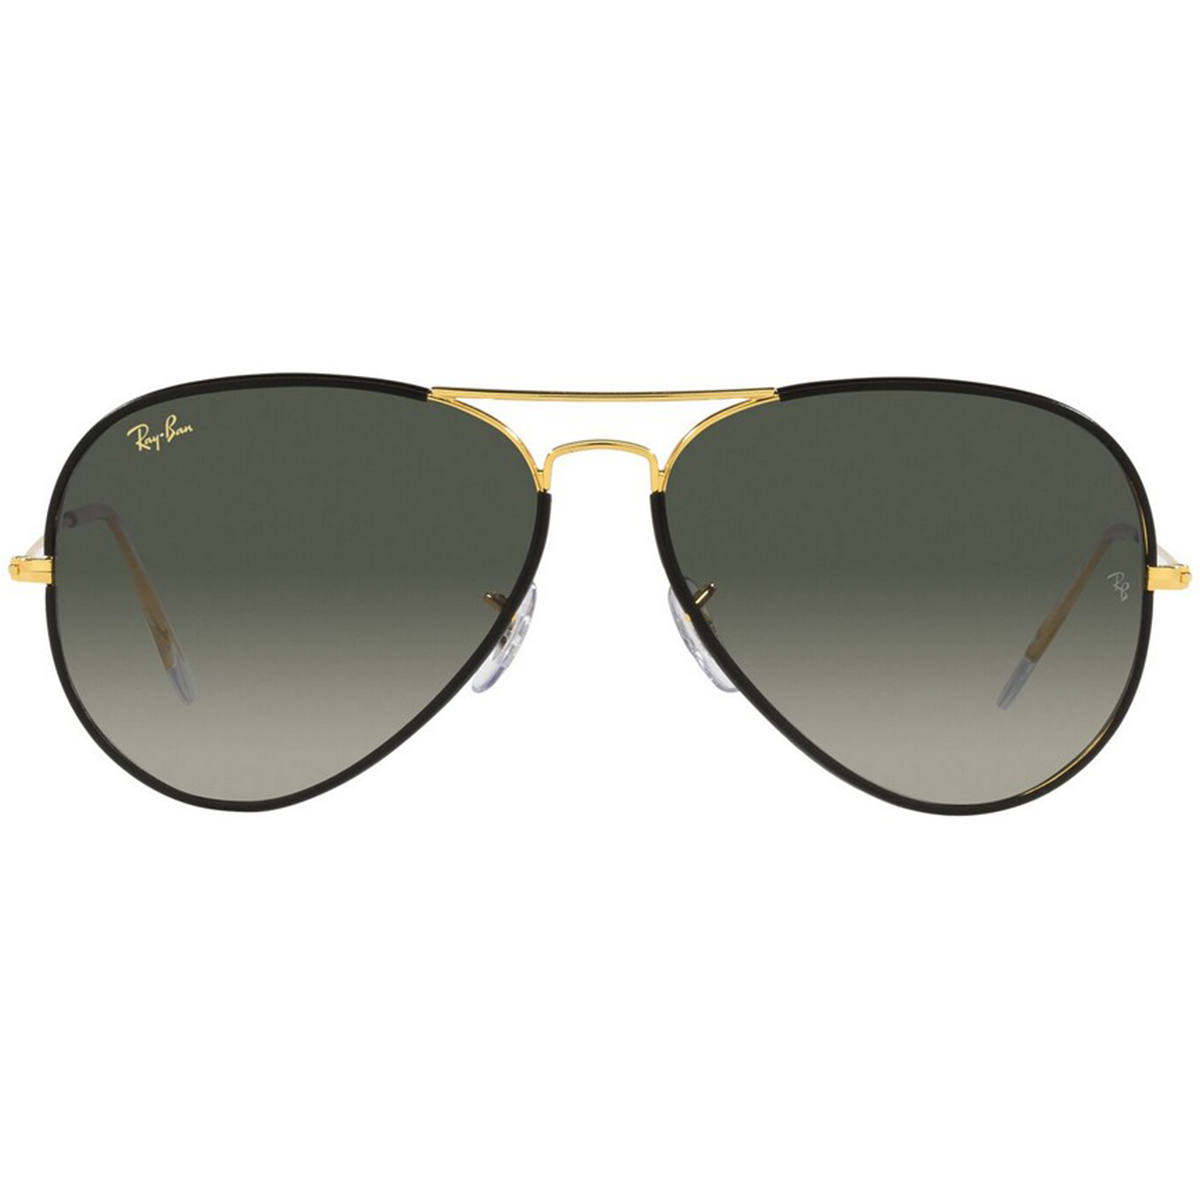 Ray-Ban Unisex Frame With  Grey Gradient Lens Sunglass